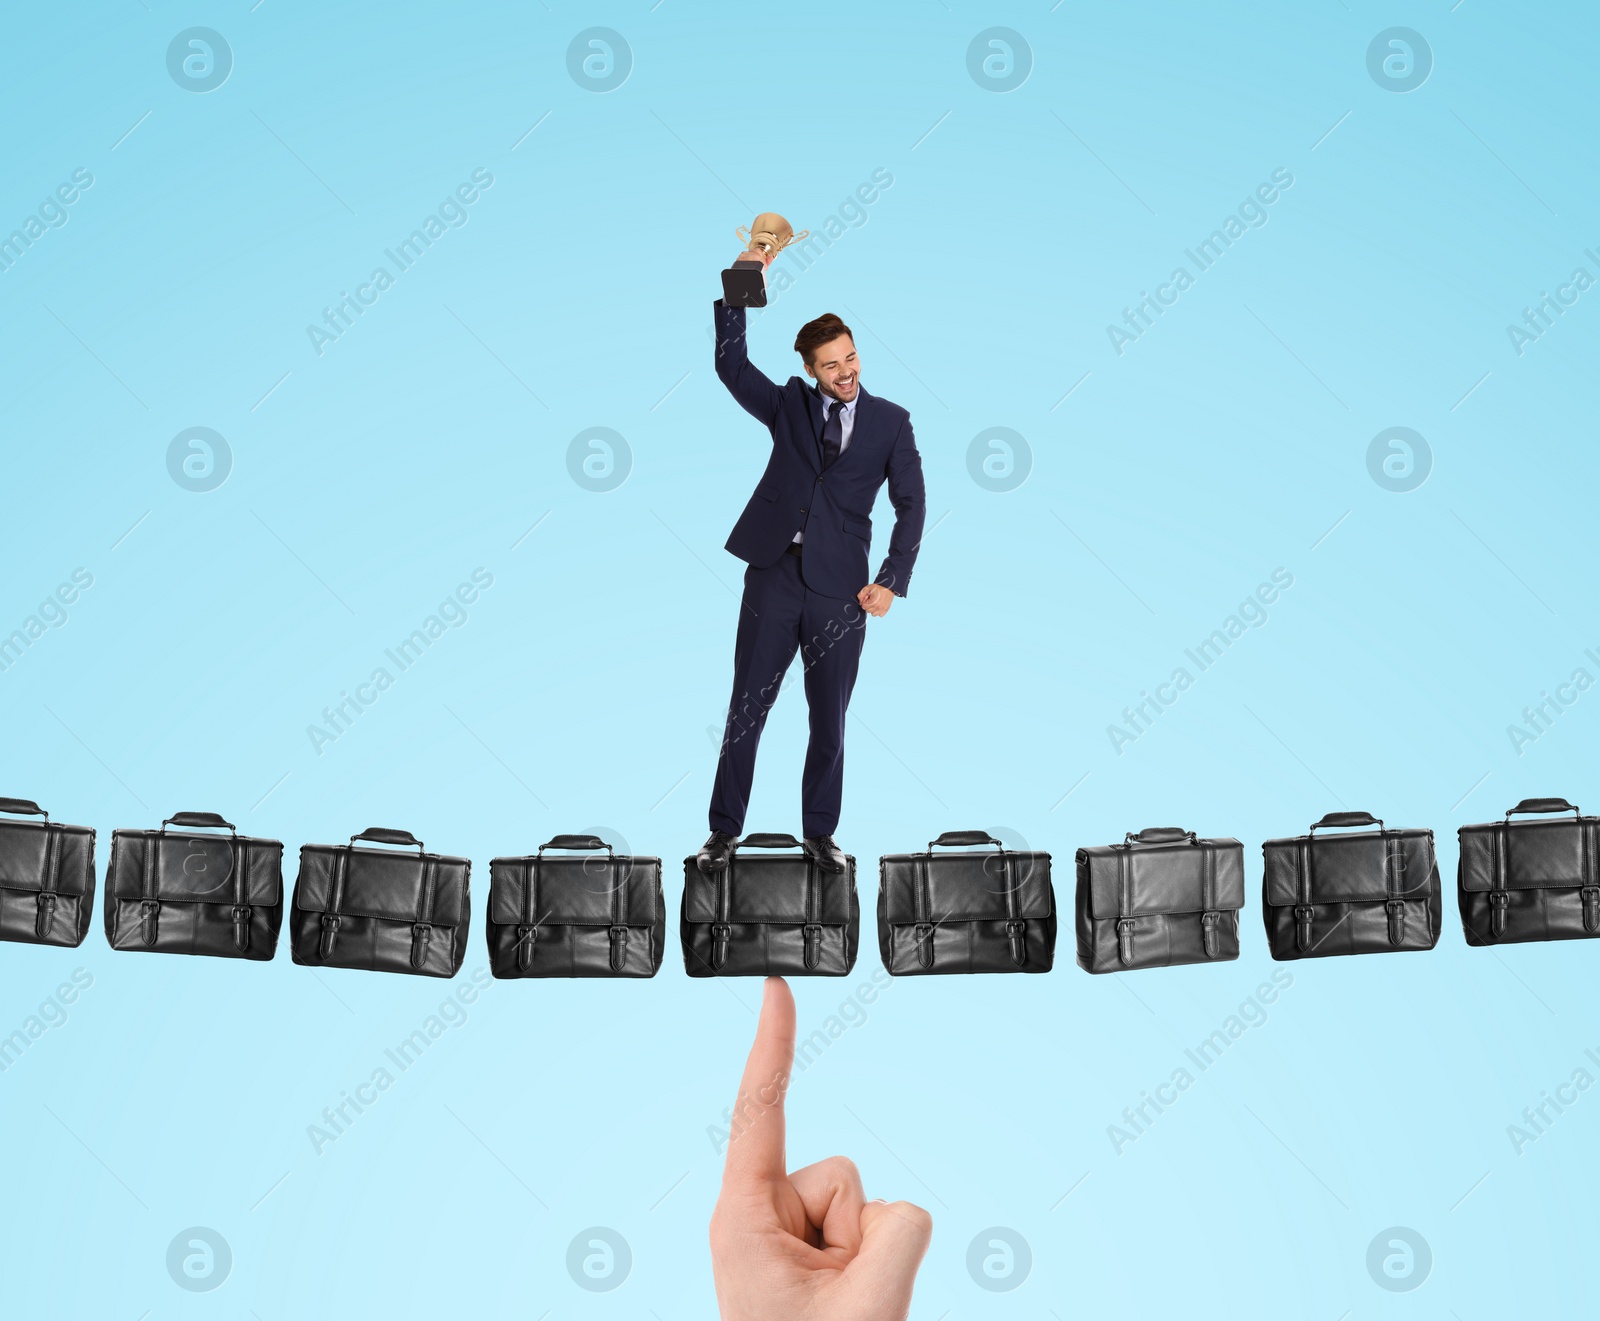 Image of Happy businessman with gold trophy cup standing on hanging bridge made of leather briefcases against light blue background. Bag supported by someone's finger